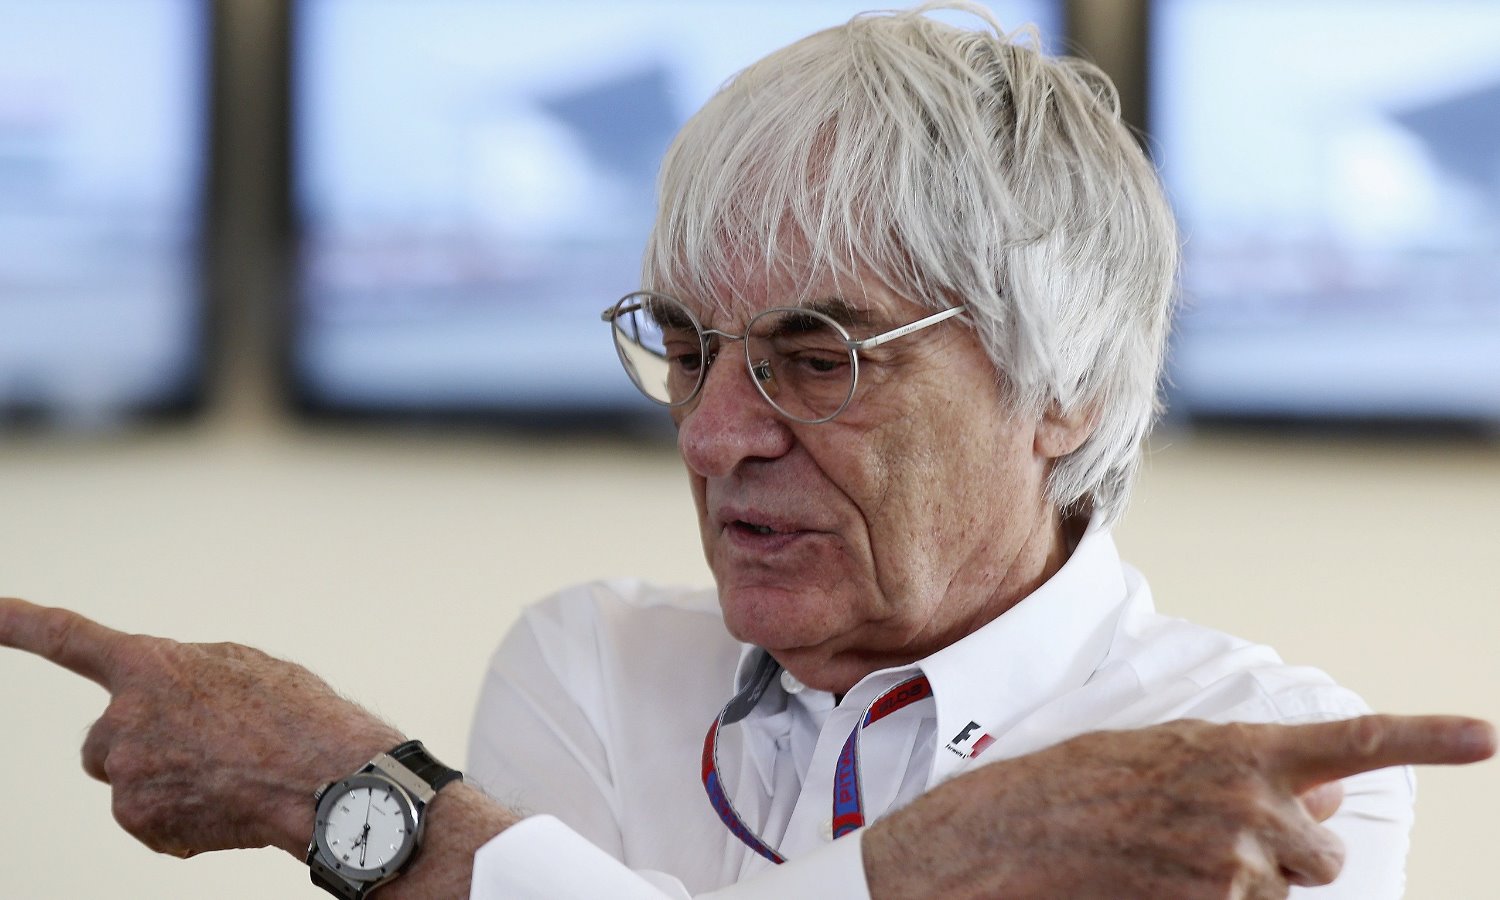 It will take 3 people to do what Ecclestone does